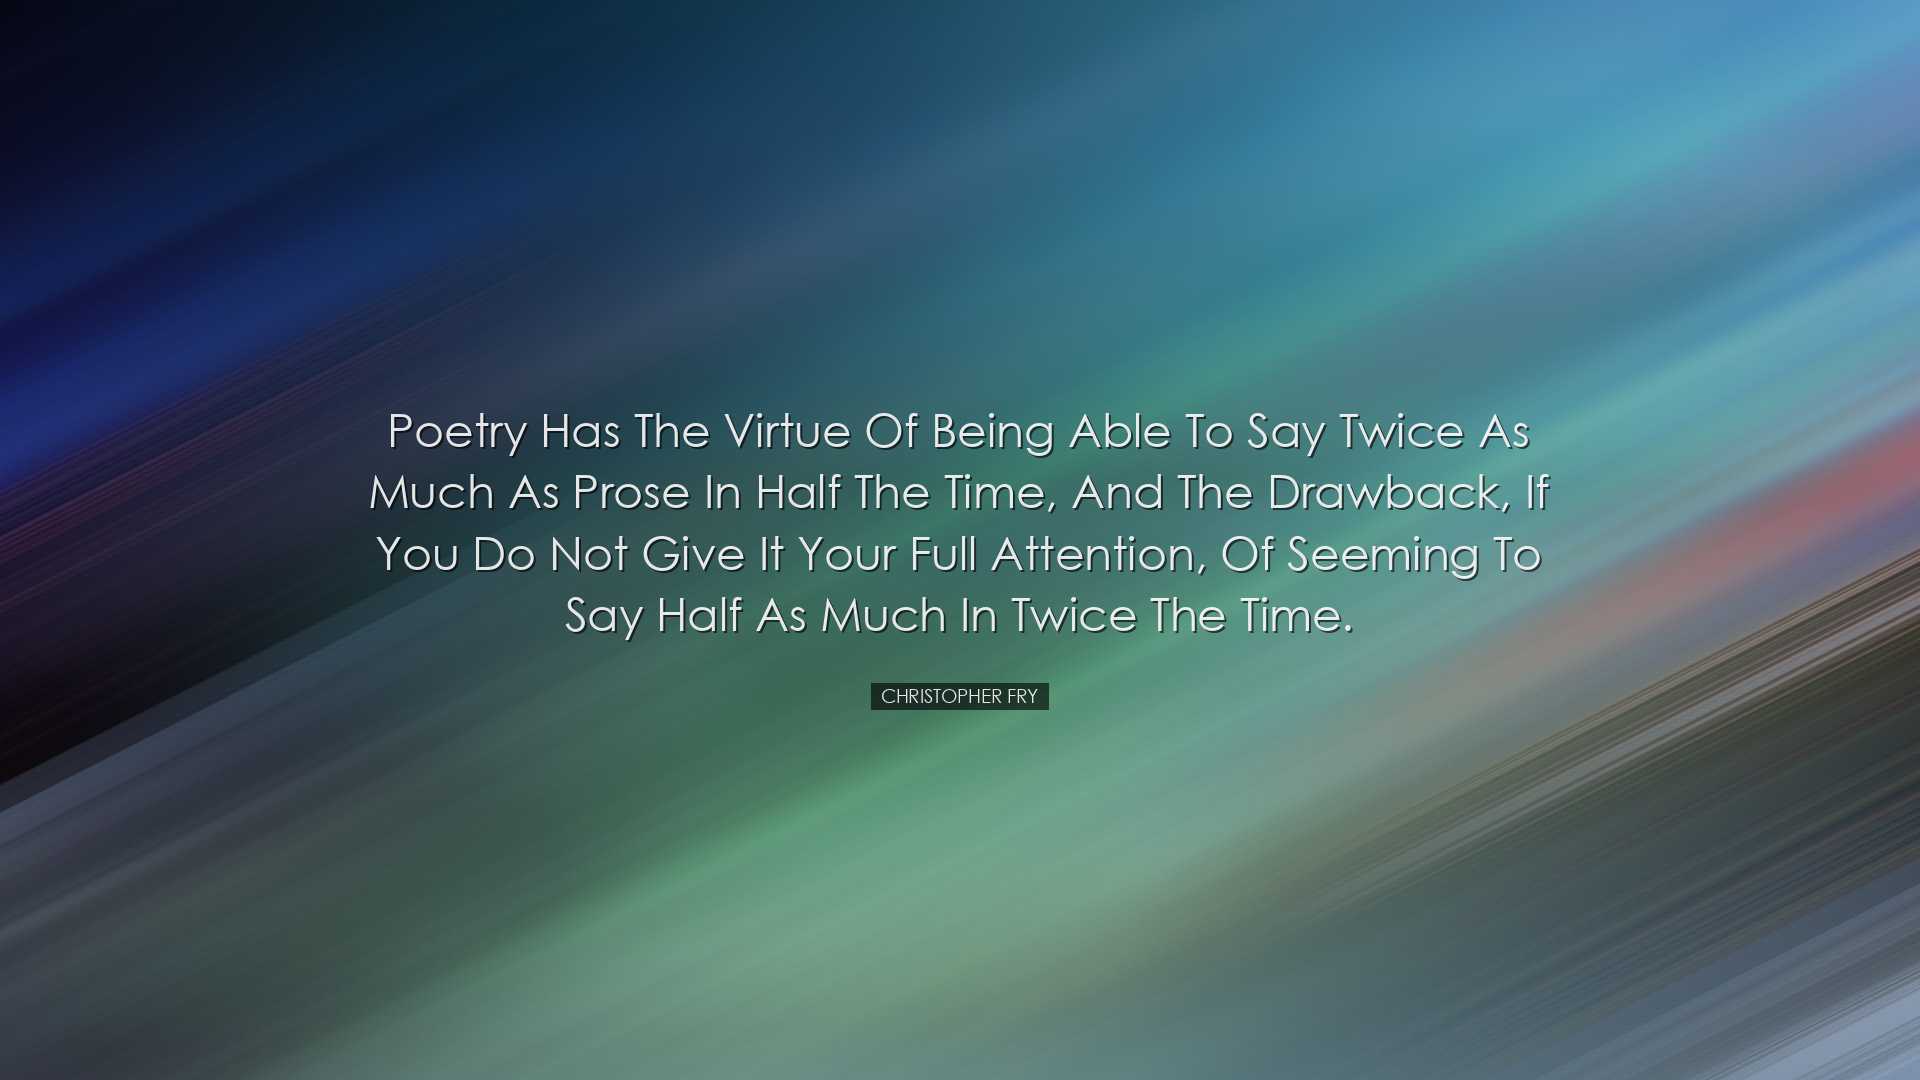 Poetry has the virtue of being able to say twice as much as prose